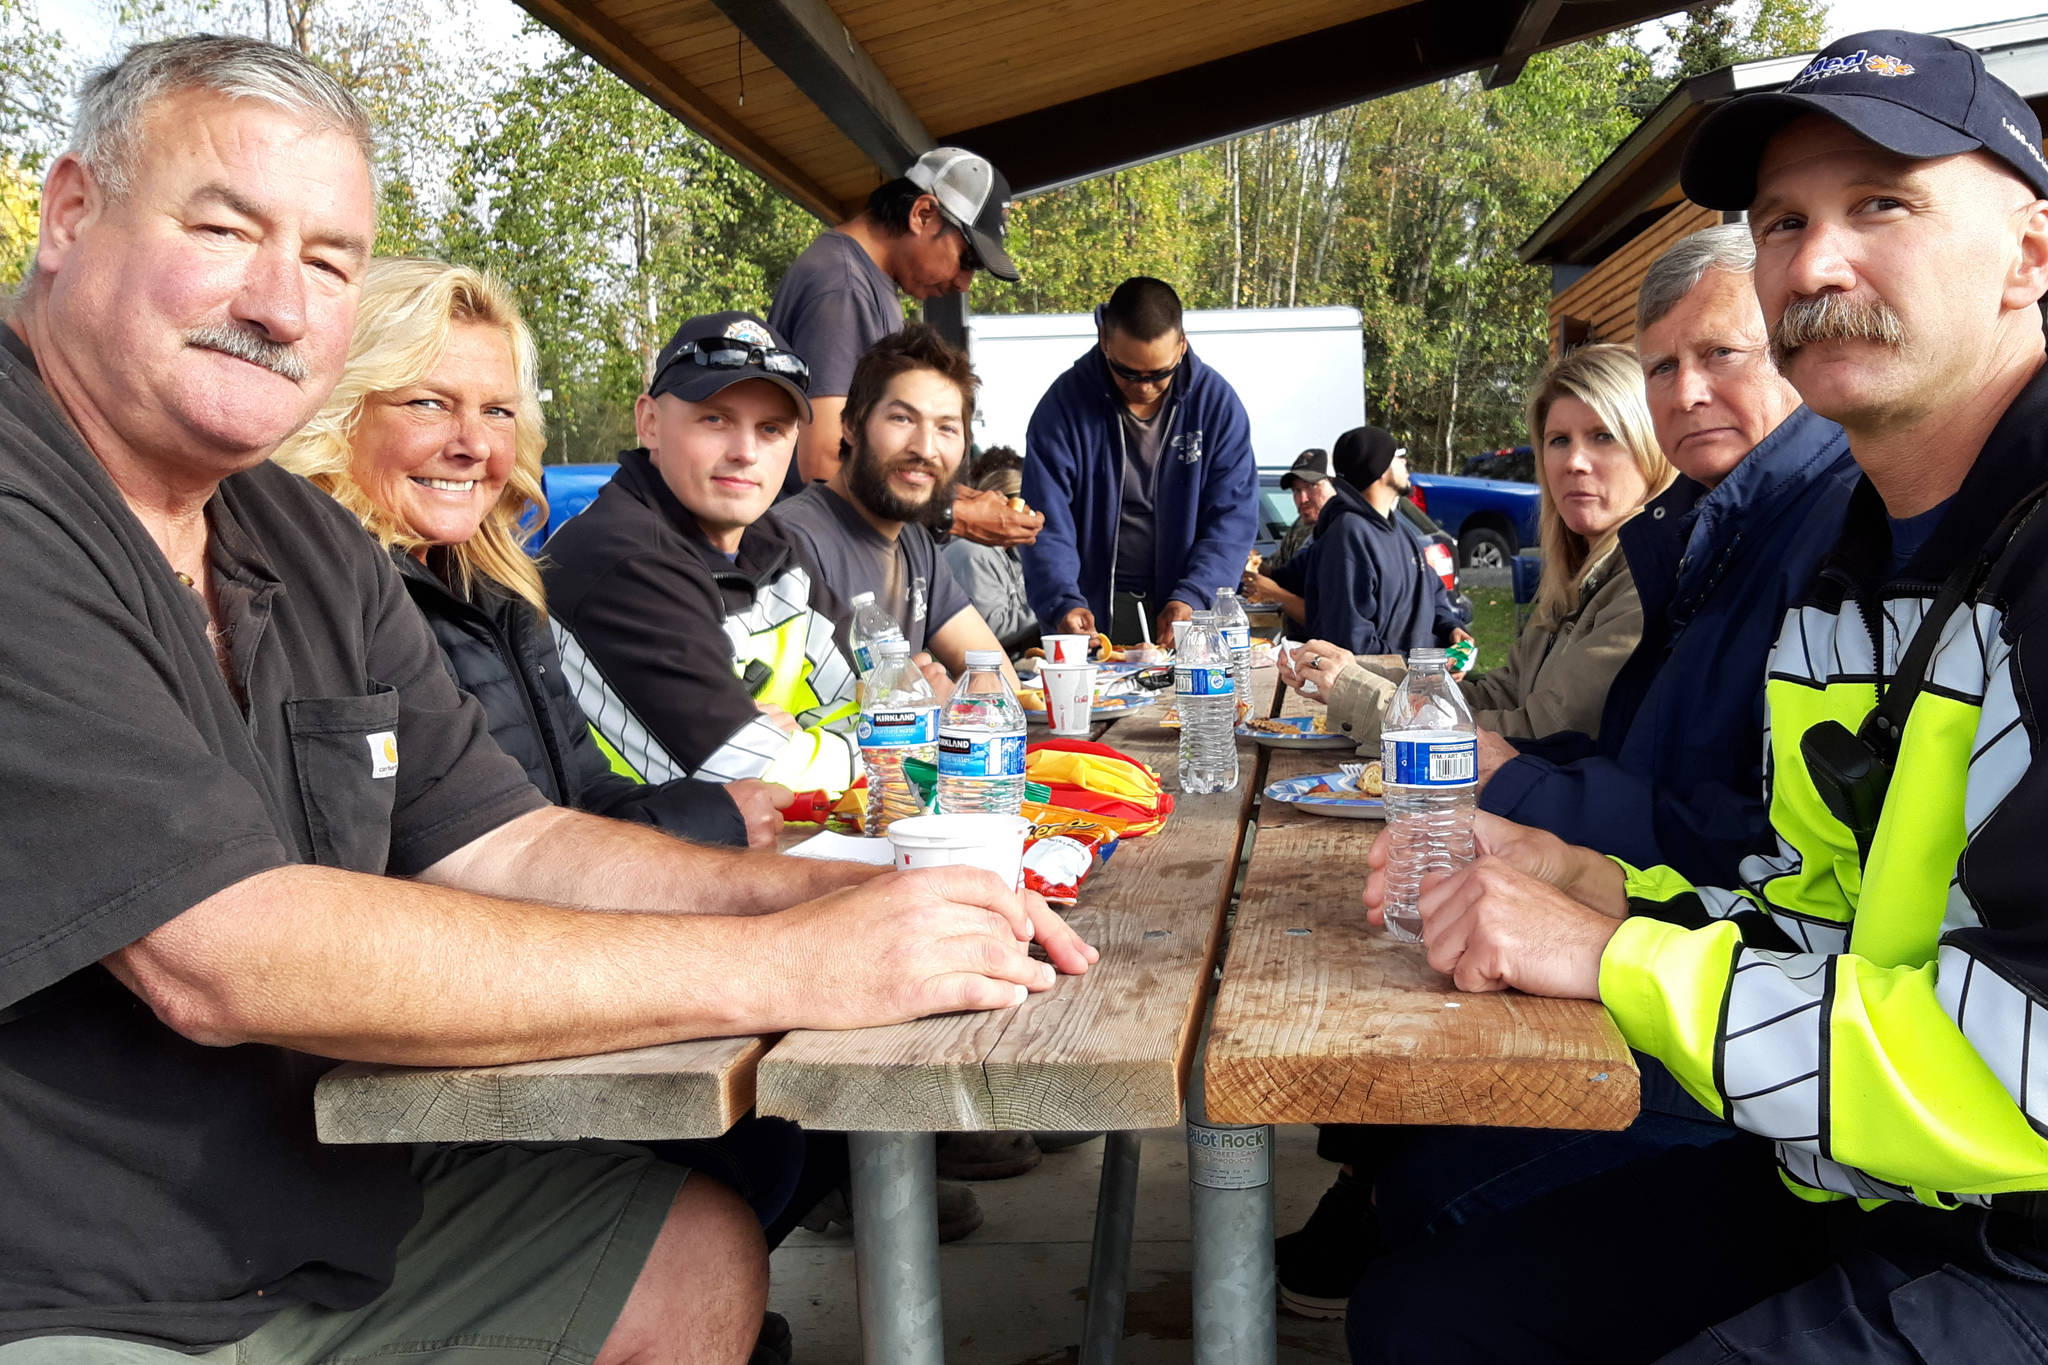 Peninsula residents and firefighters enjoy a meal together during the first responder appreciation barbecue at Soldotna Creek Park on Monday, Sept. 9, 2019, Soldotna, Alaska. (Photo by Brian Mazurek/Peninsula Clarion)